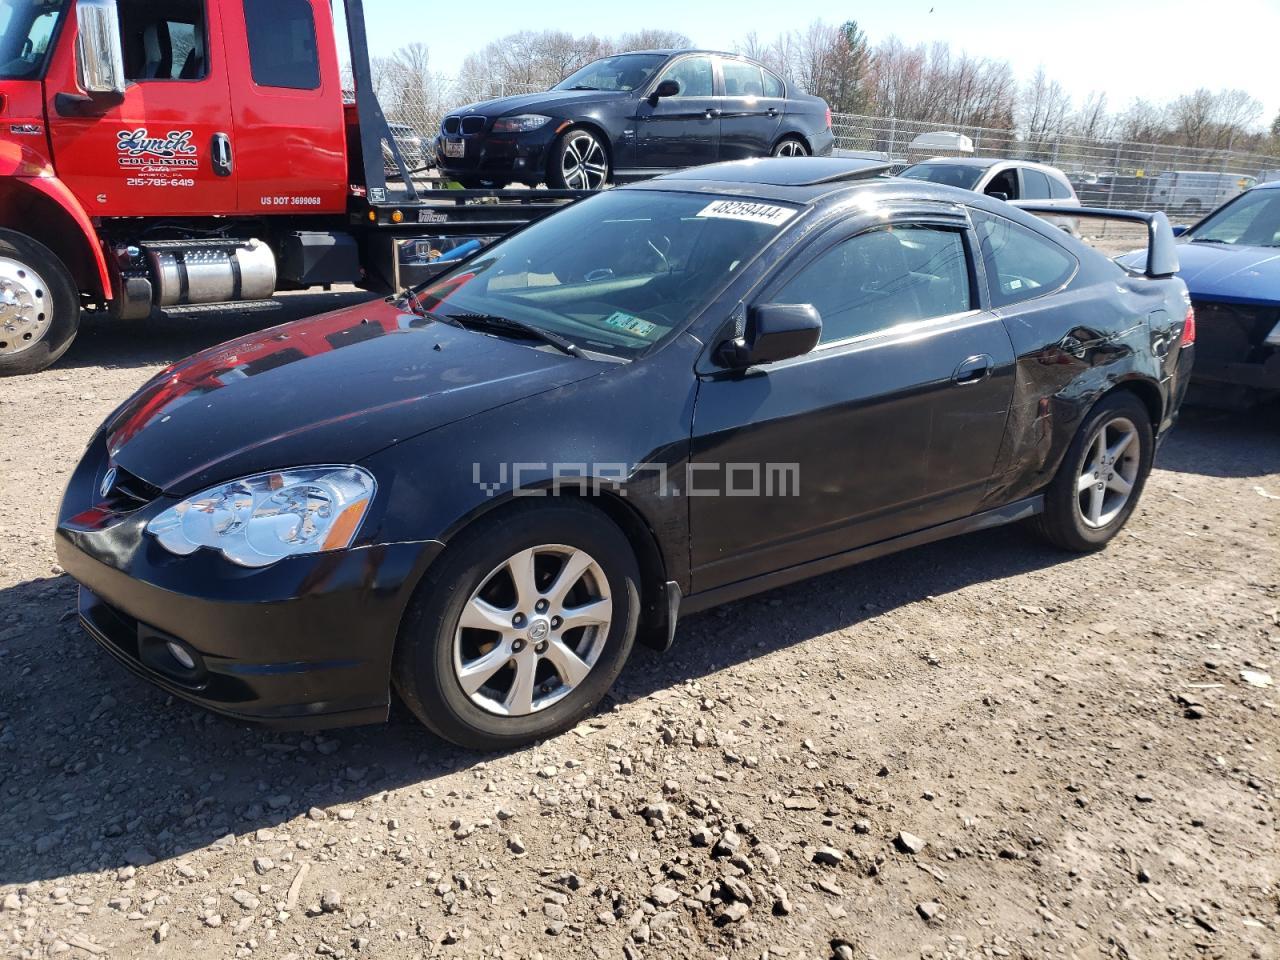 VIN: JH4DC54894S016745 - acura rsx